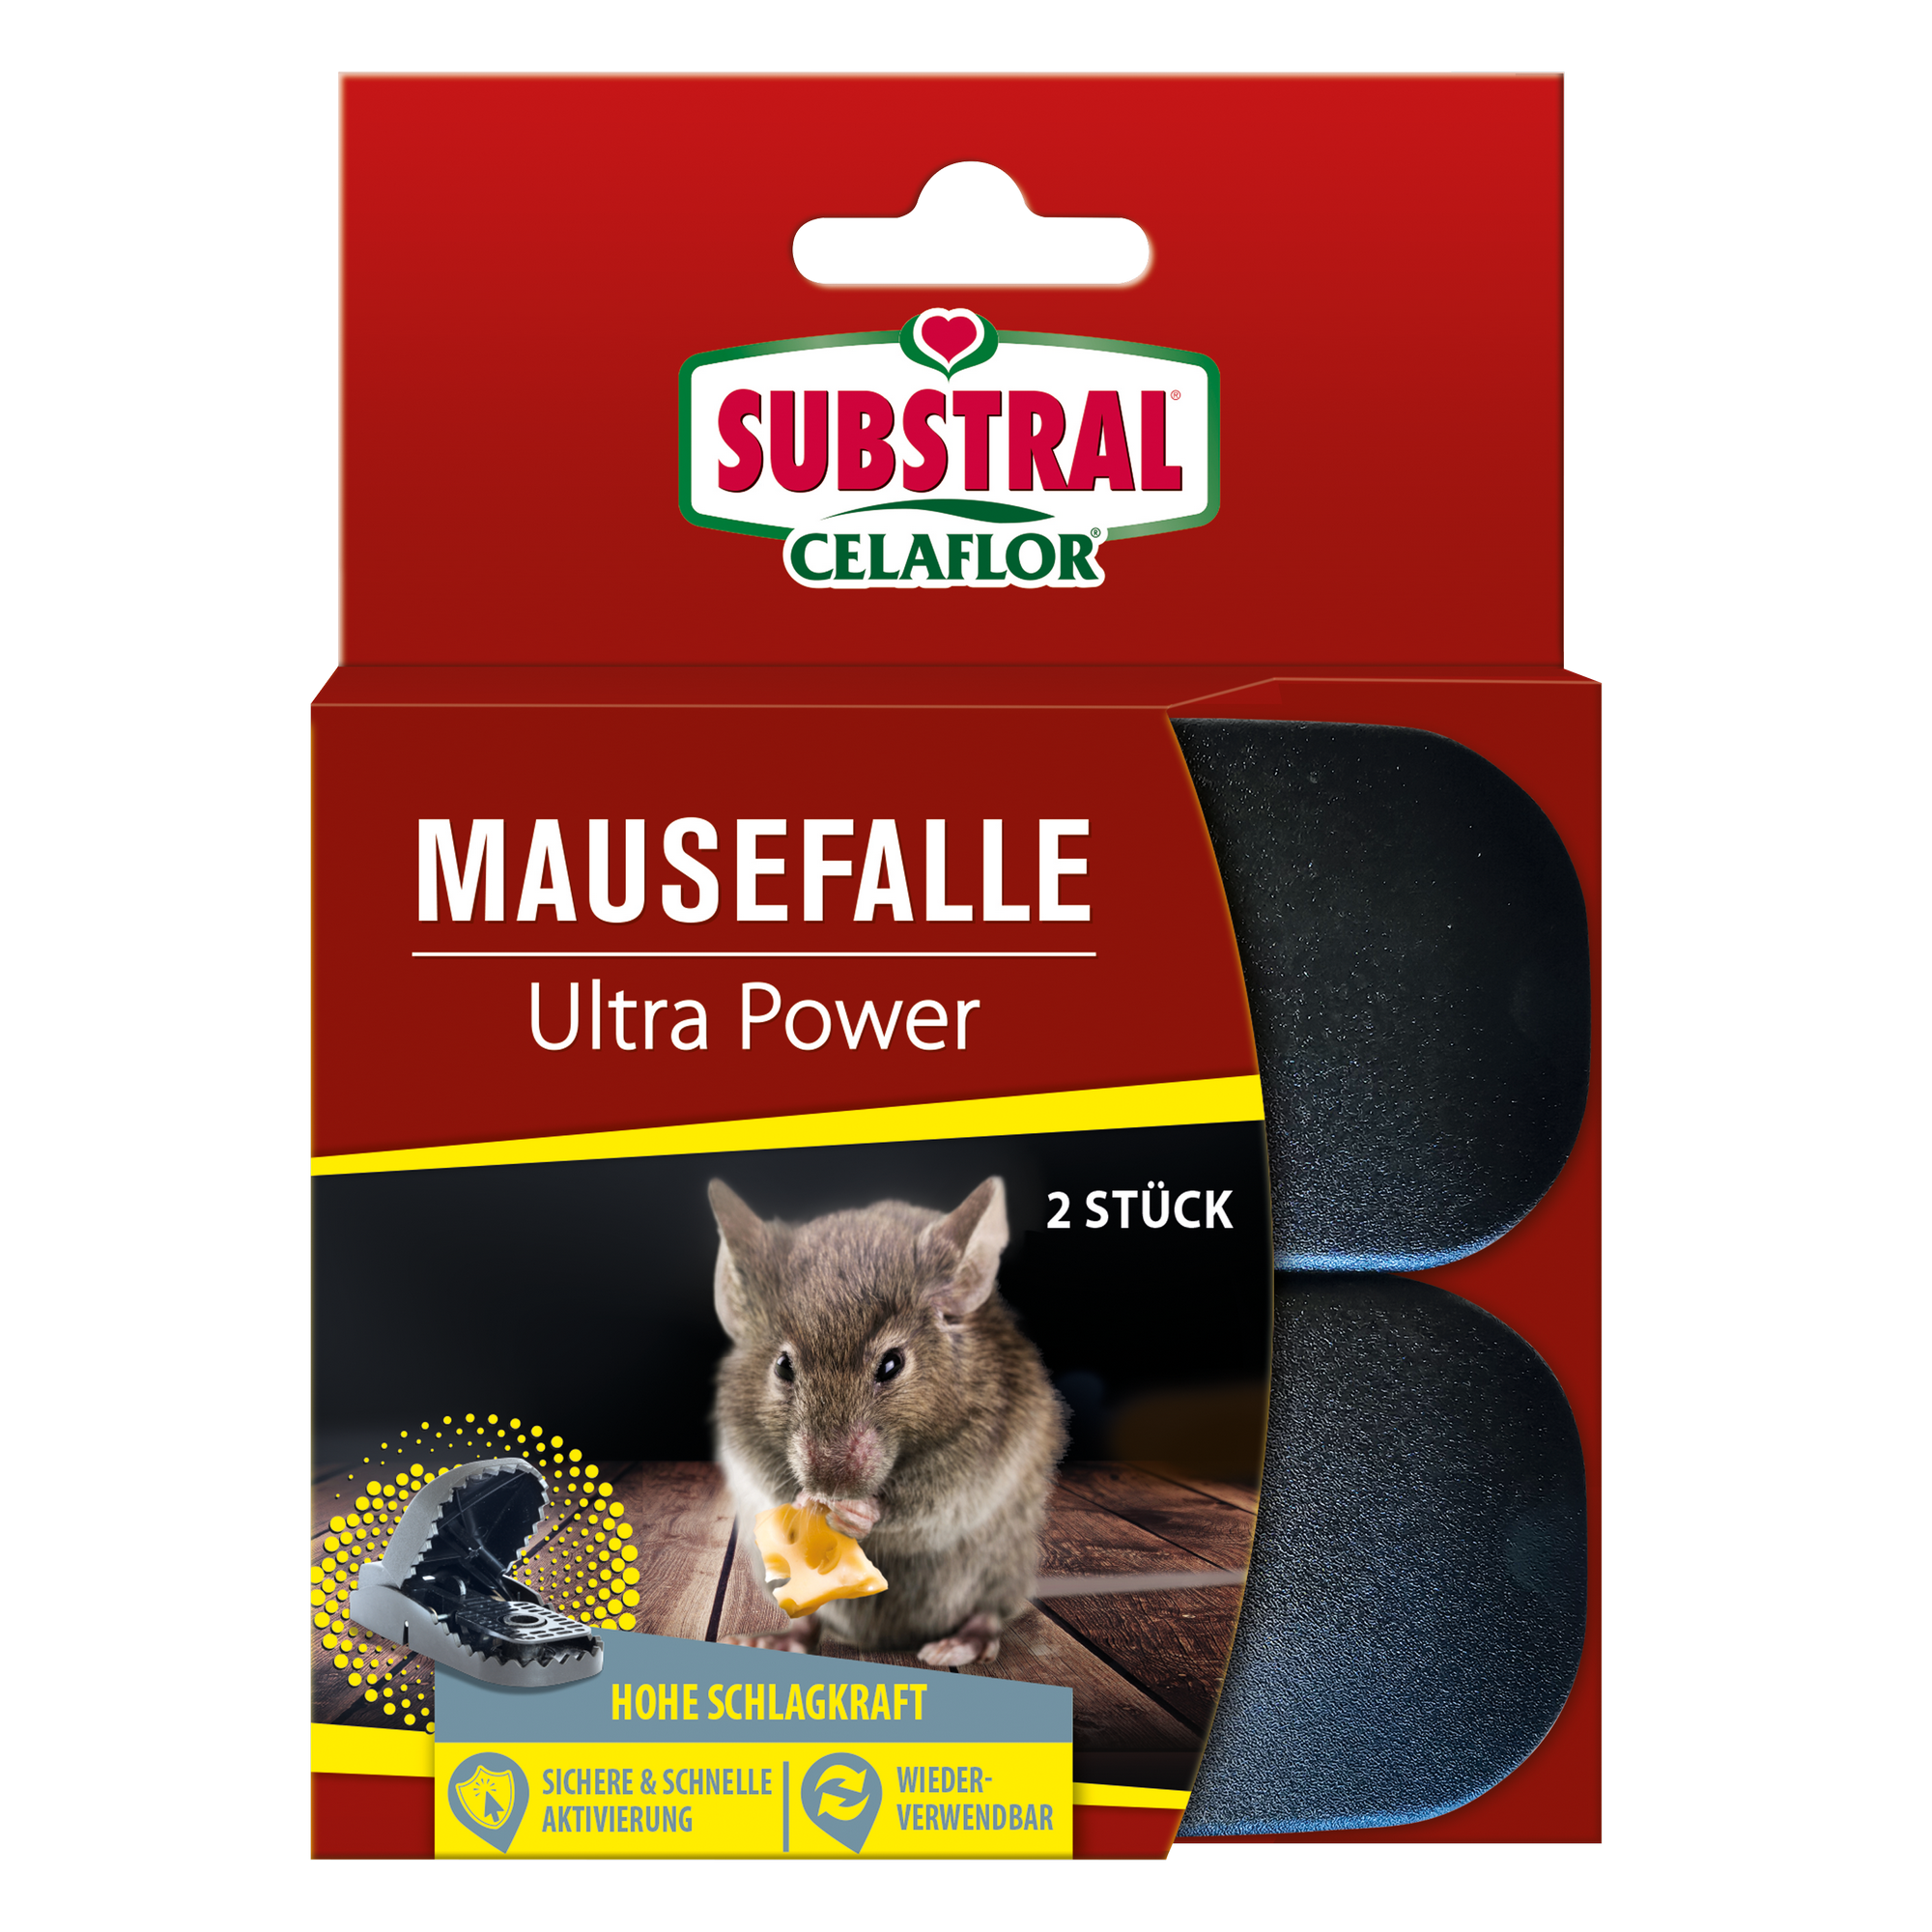 Mausefalle 'Ultra Power' 2 Stück + product picture